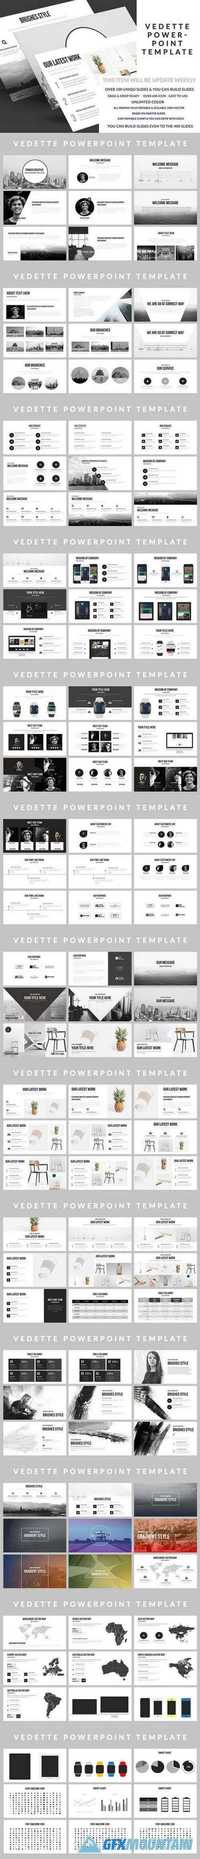 Vedette PowerPoint Template 678251